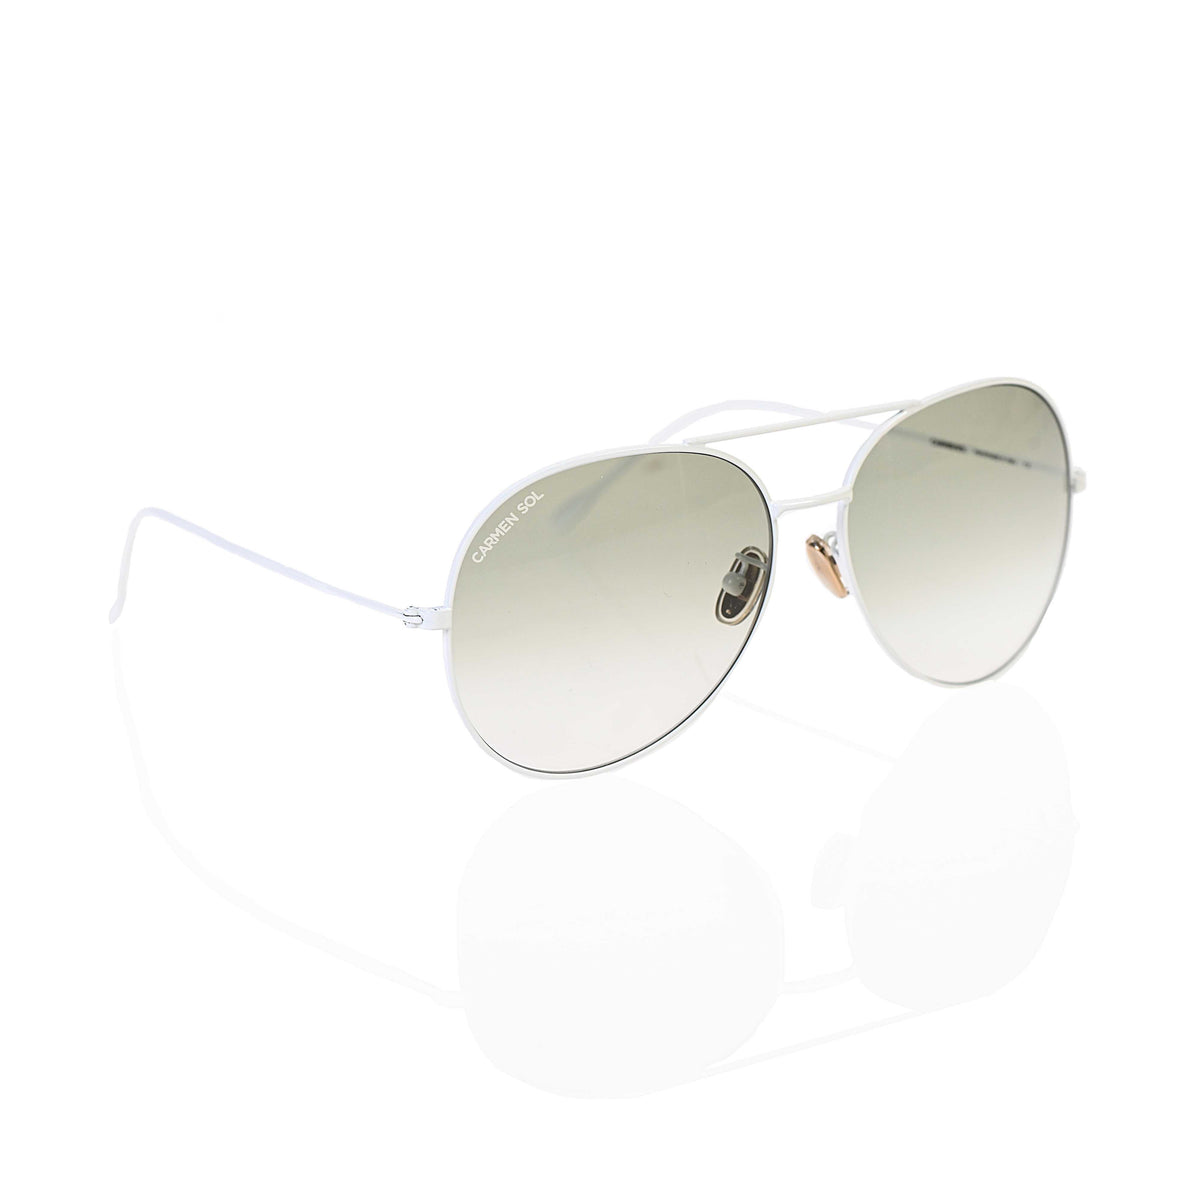 Green sunglasses with white frame avaiator perfect for street look from carmen sol